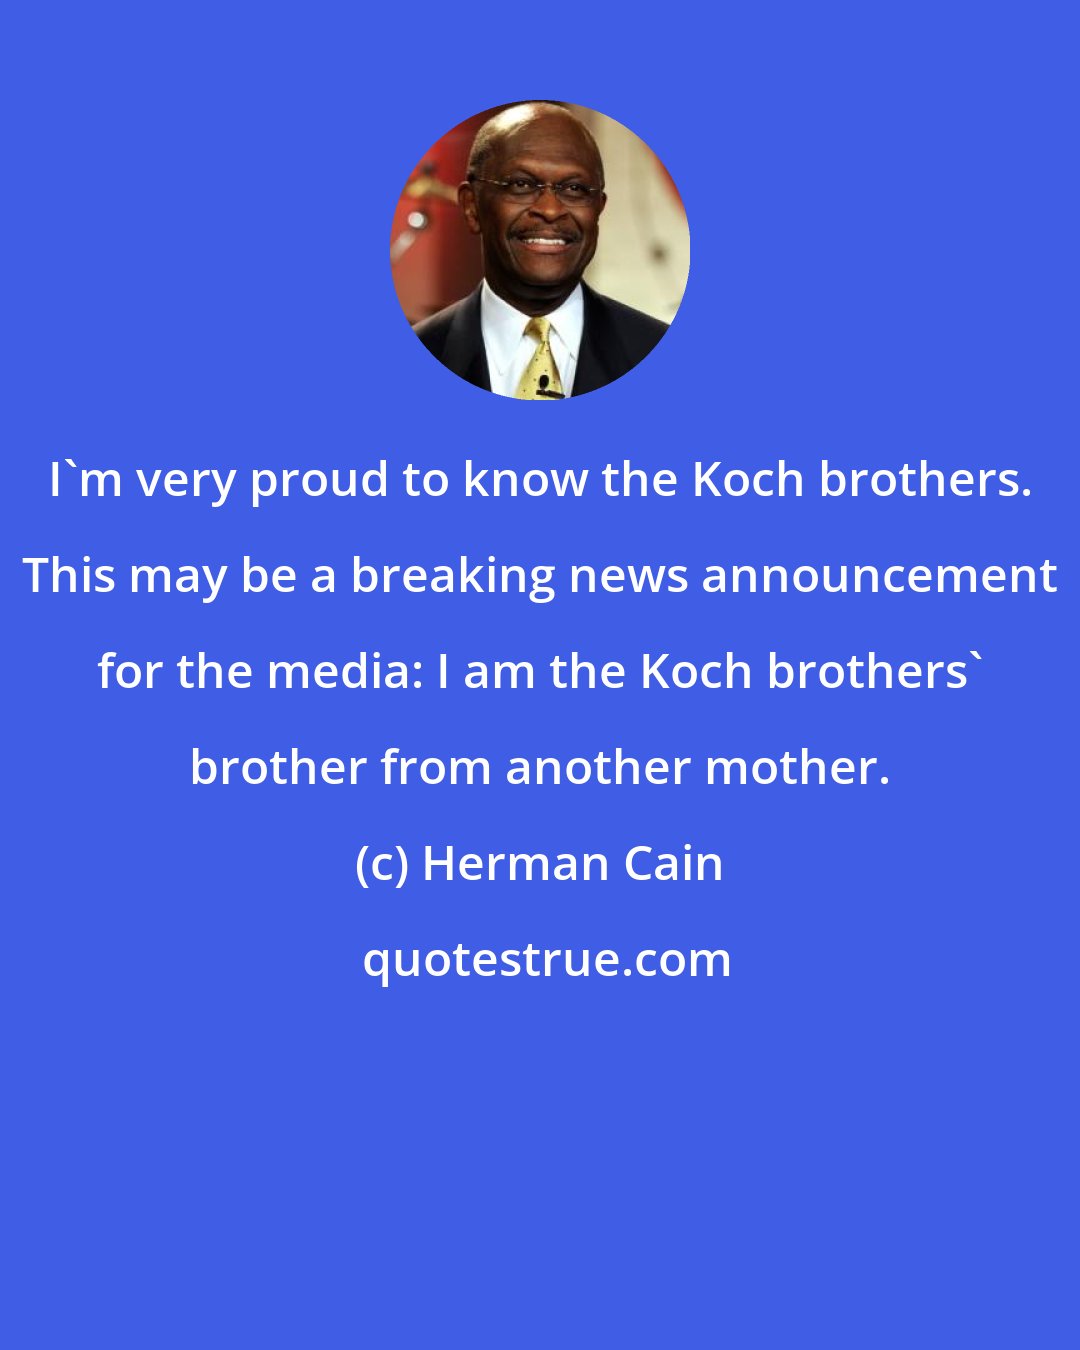 Herman Cain: I'm very proud to know the Koch brothers. This may be a breaking news announcement for the media: I am the Koch brothers' brother from another mother.